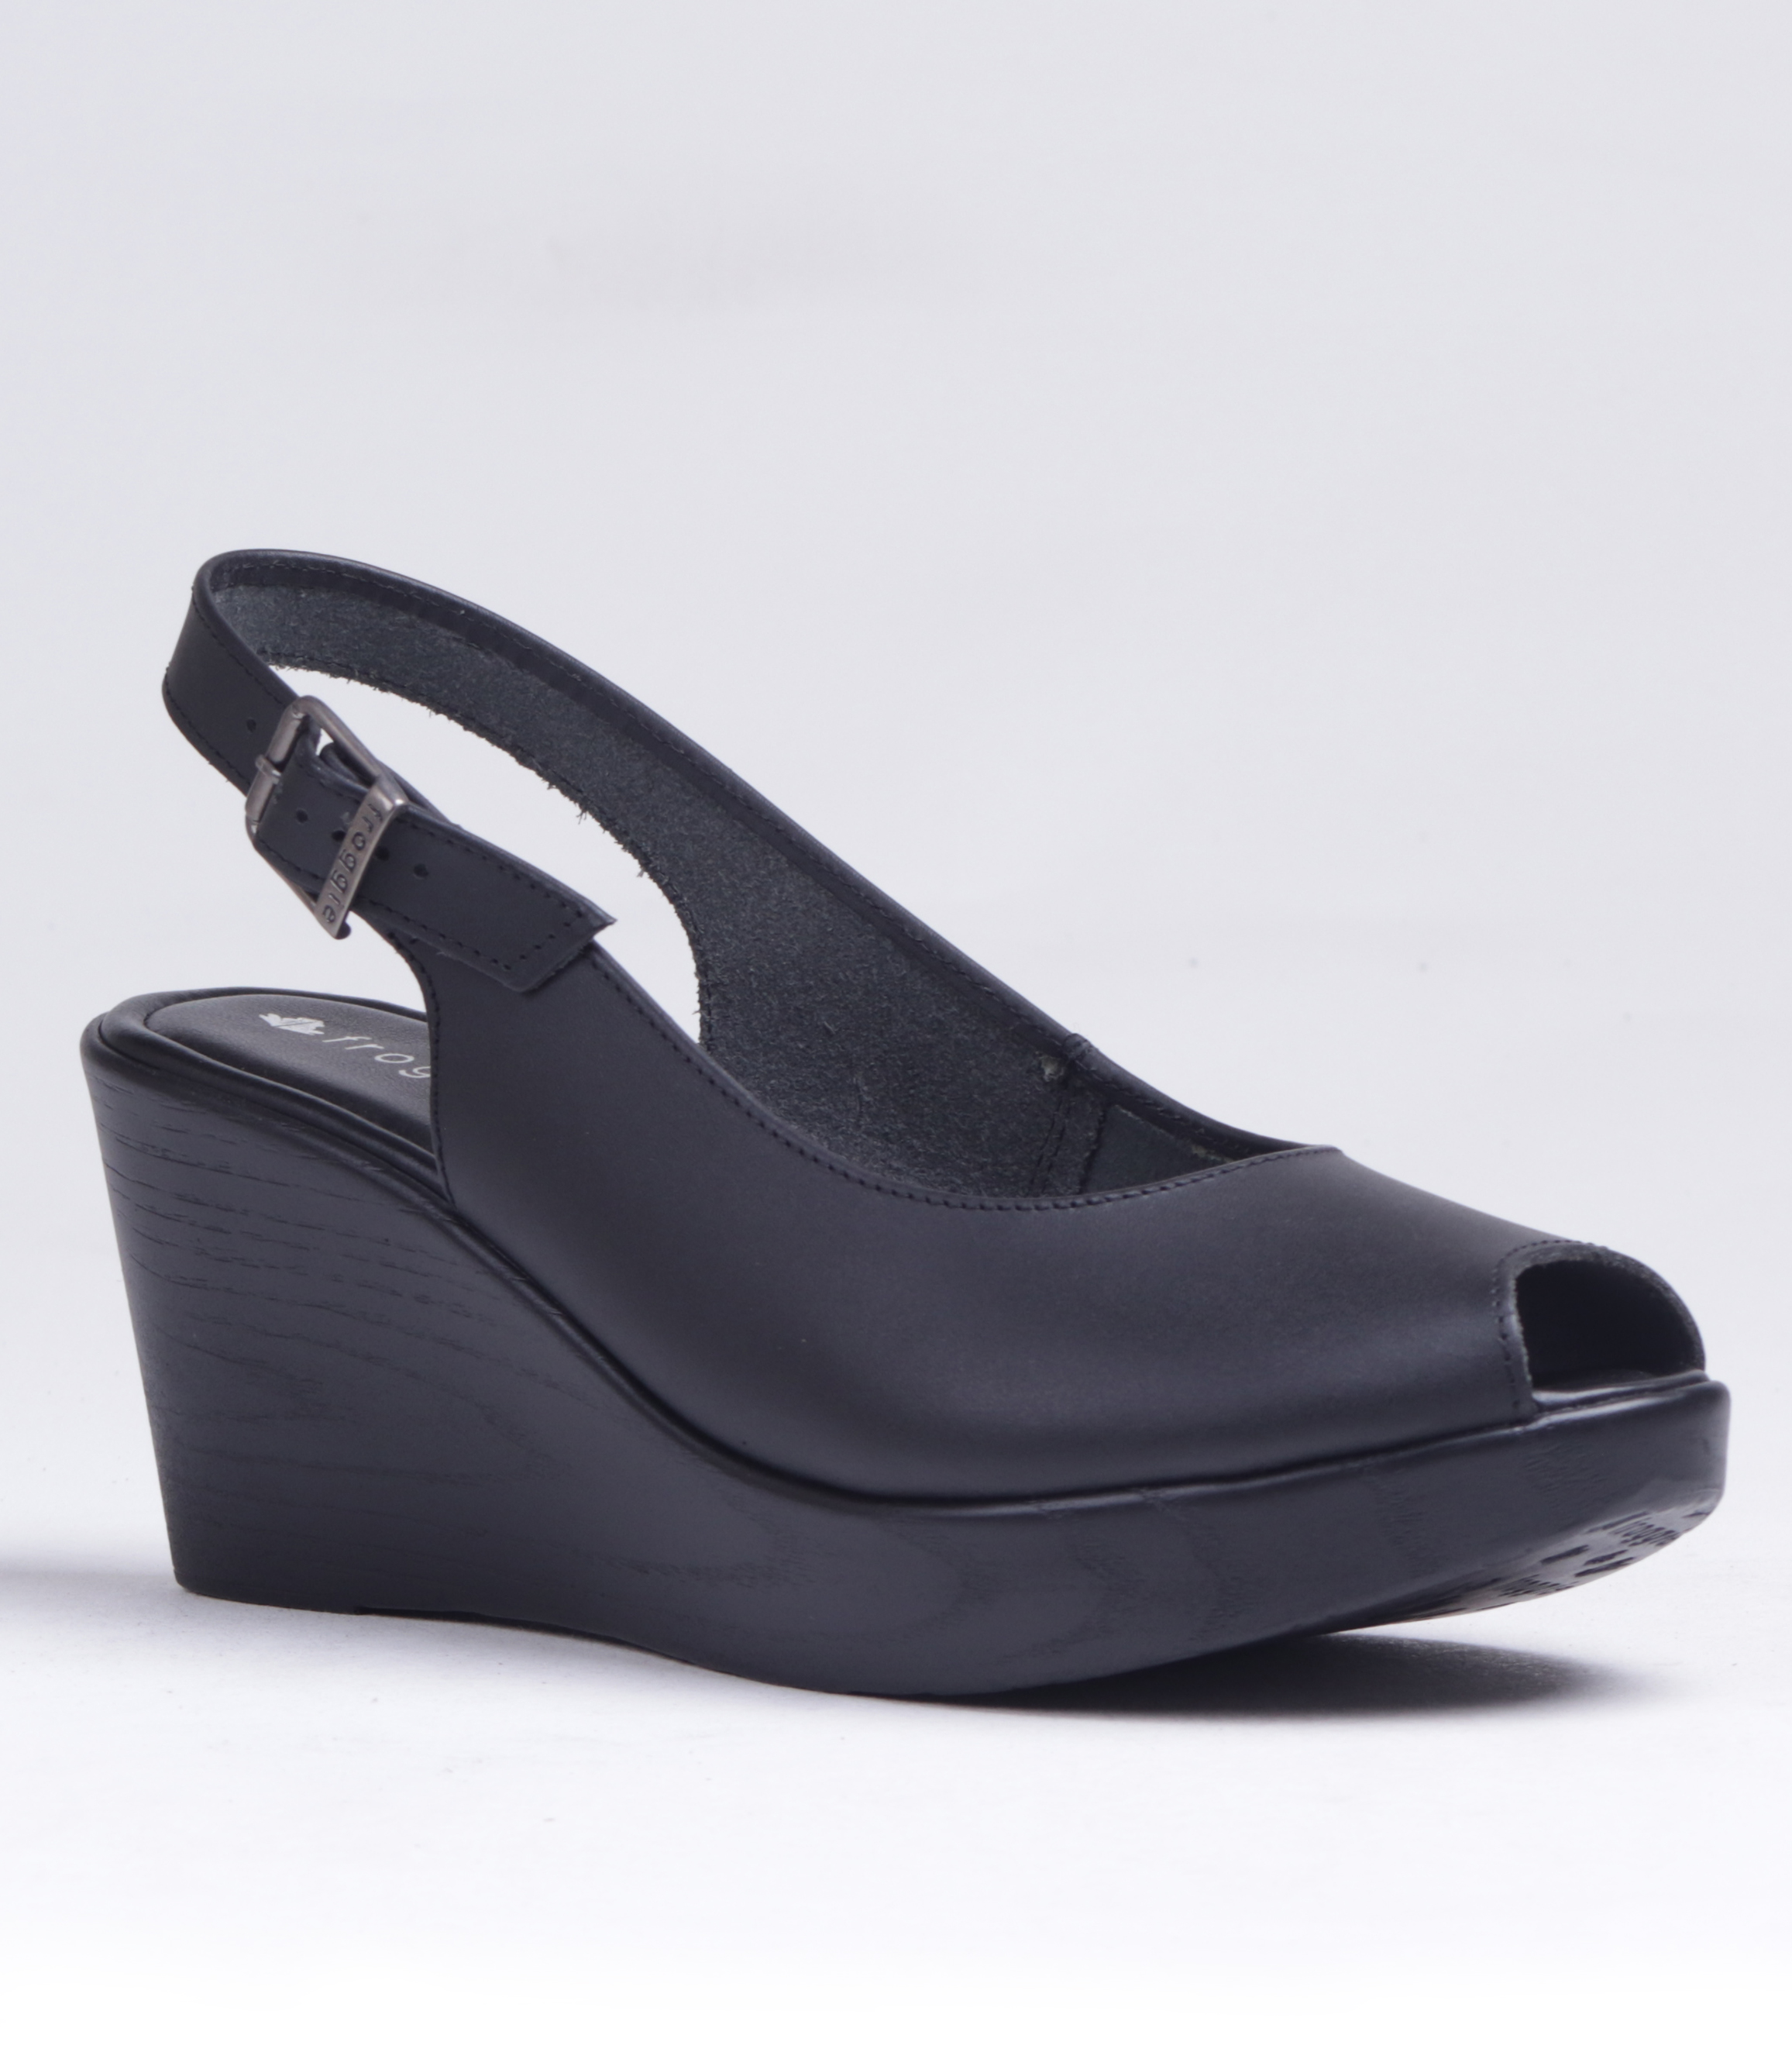 FROGGIE BLACK LEATHER SLING BACK WEDGE | Rosella - Style inspired by ...